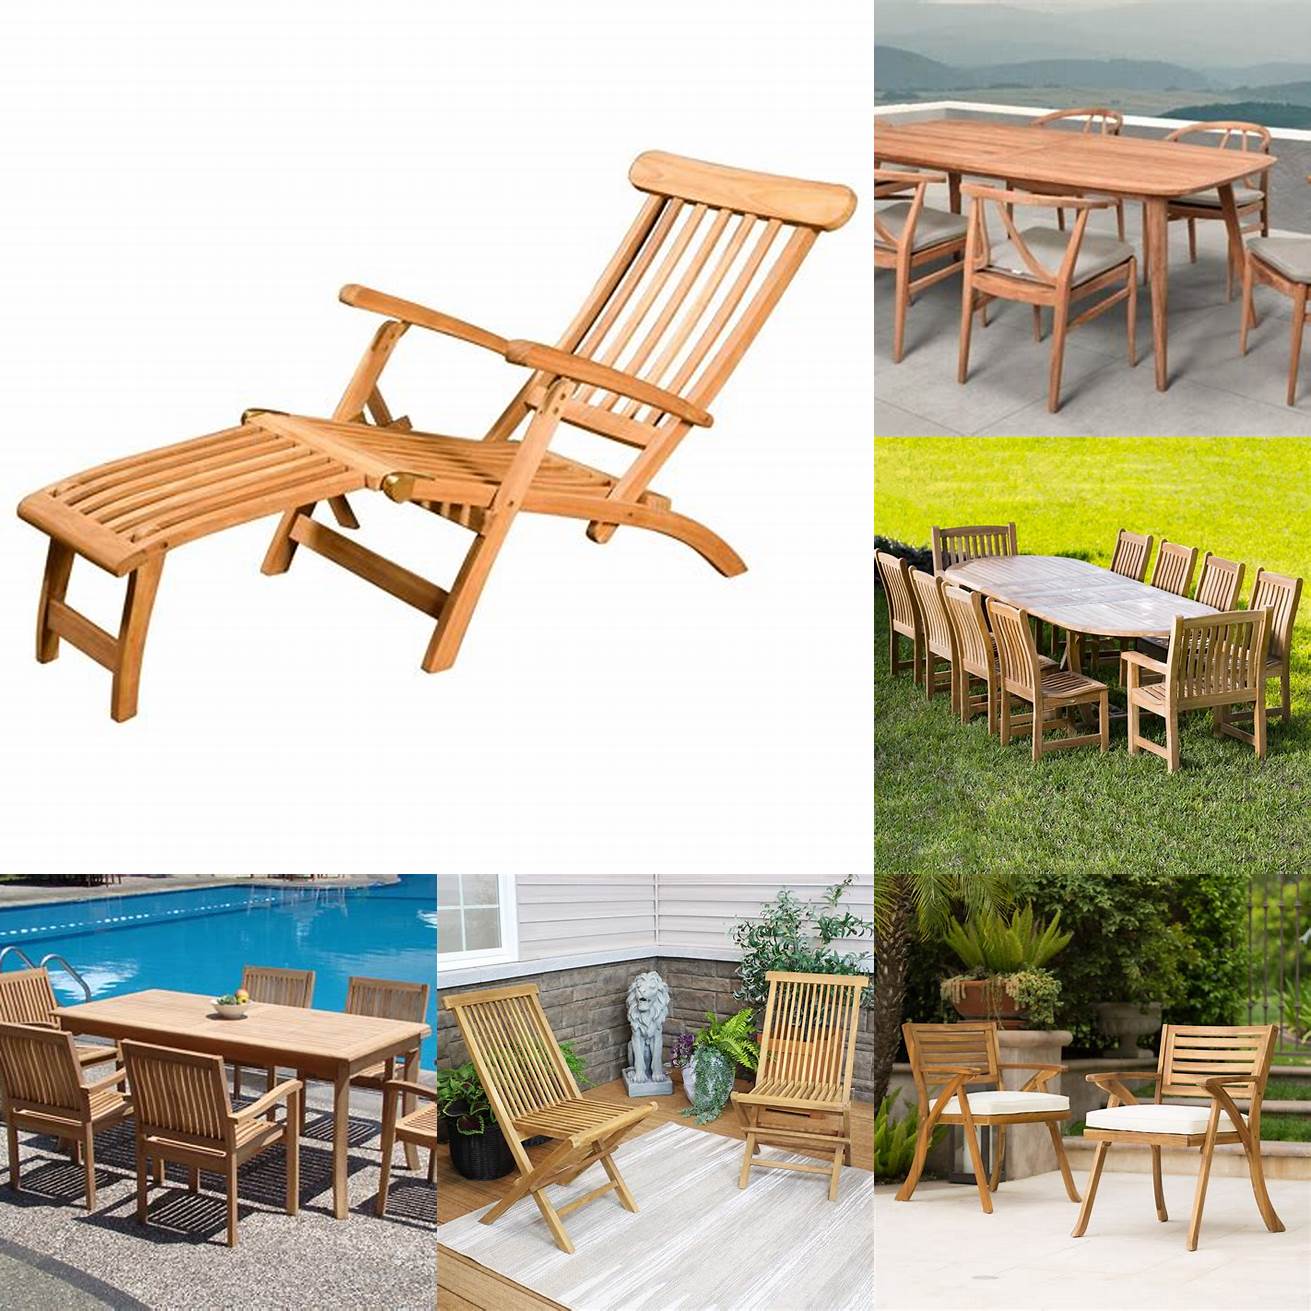 Teak Furniture With A Low Maintenance Finish